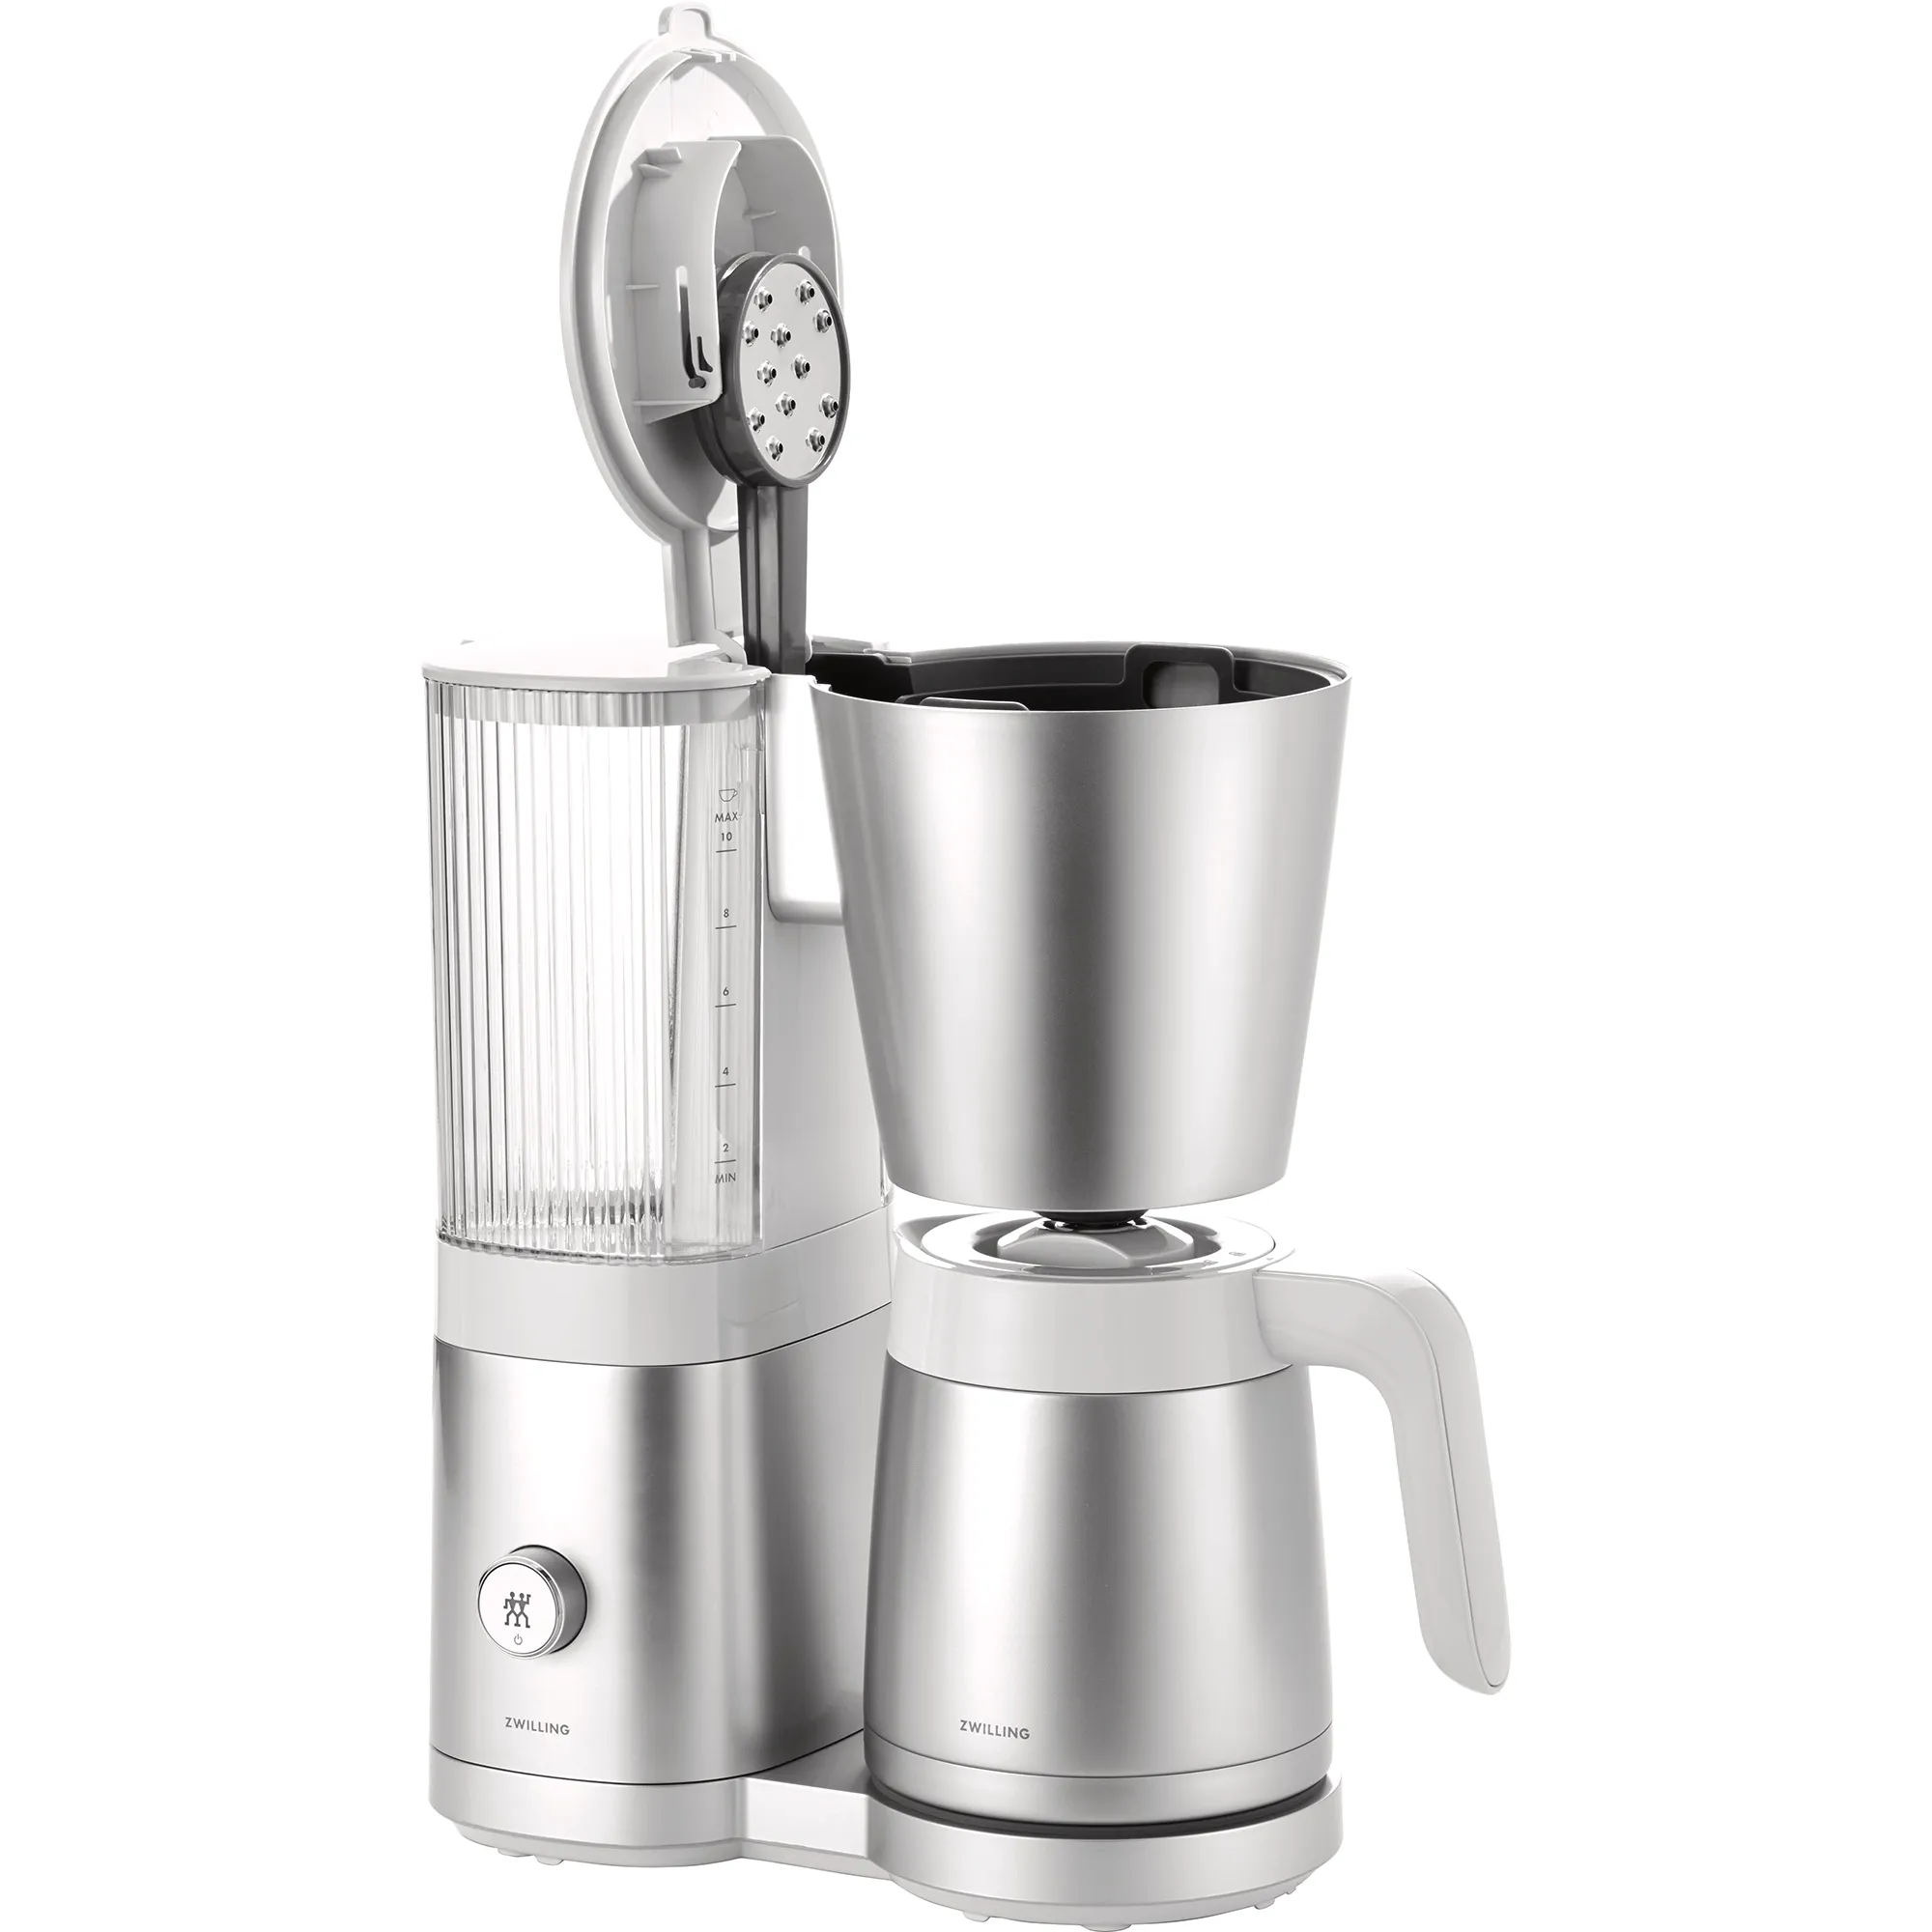 https://www.homethreads.com/files/zwilling/1023536-zwilling-enfinigy-drip-coffee-maker-with-thermo-carafe-10-cup-awarded-the-sca-golden-cup-standard-silver-3.webp